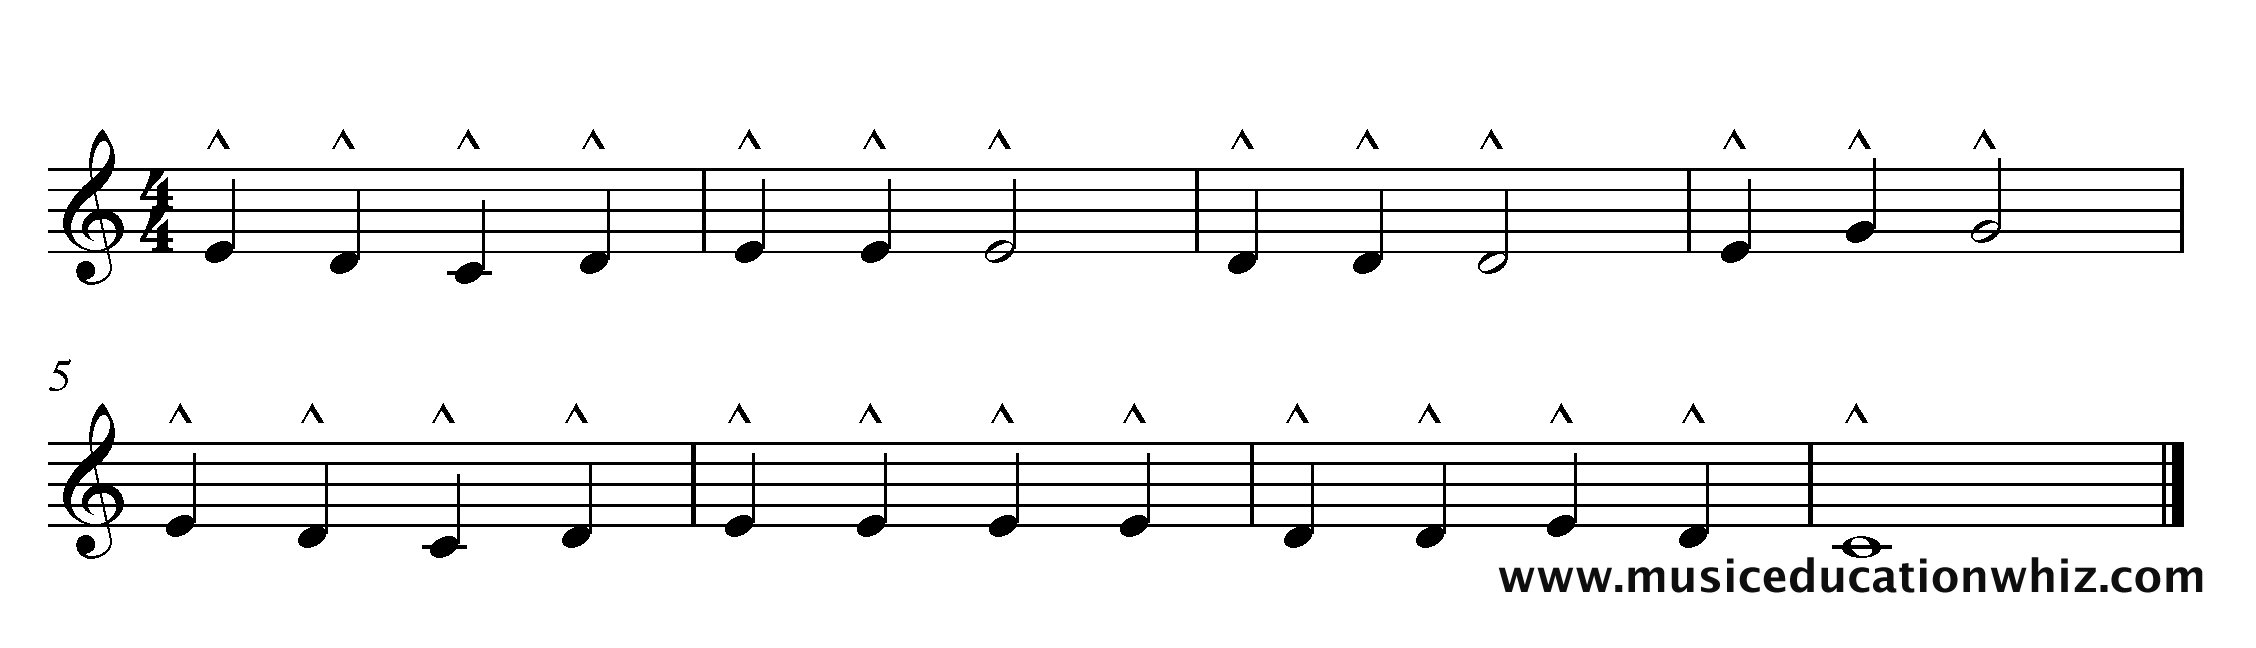 The music for 'Mary Had A Little Lamb' with marcato markings.